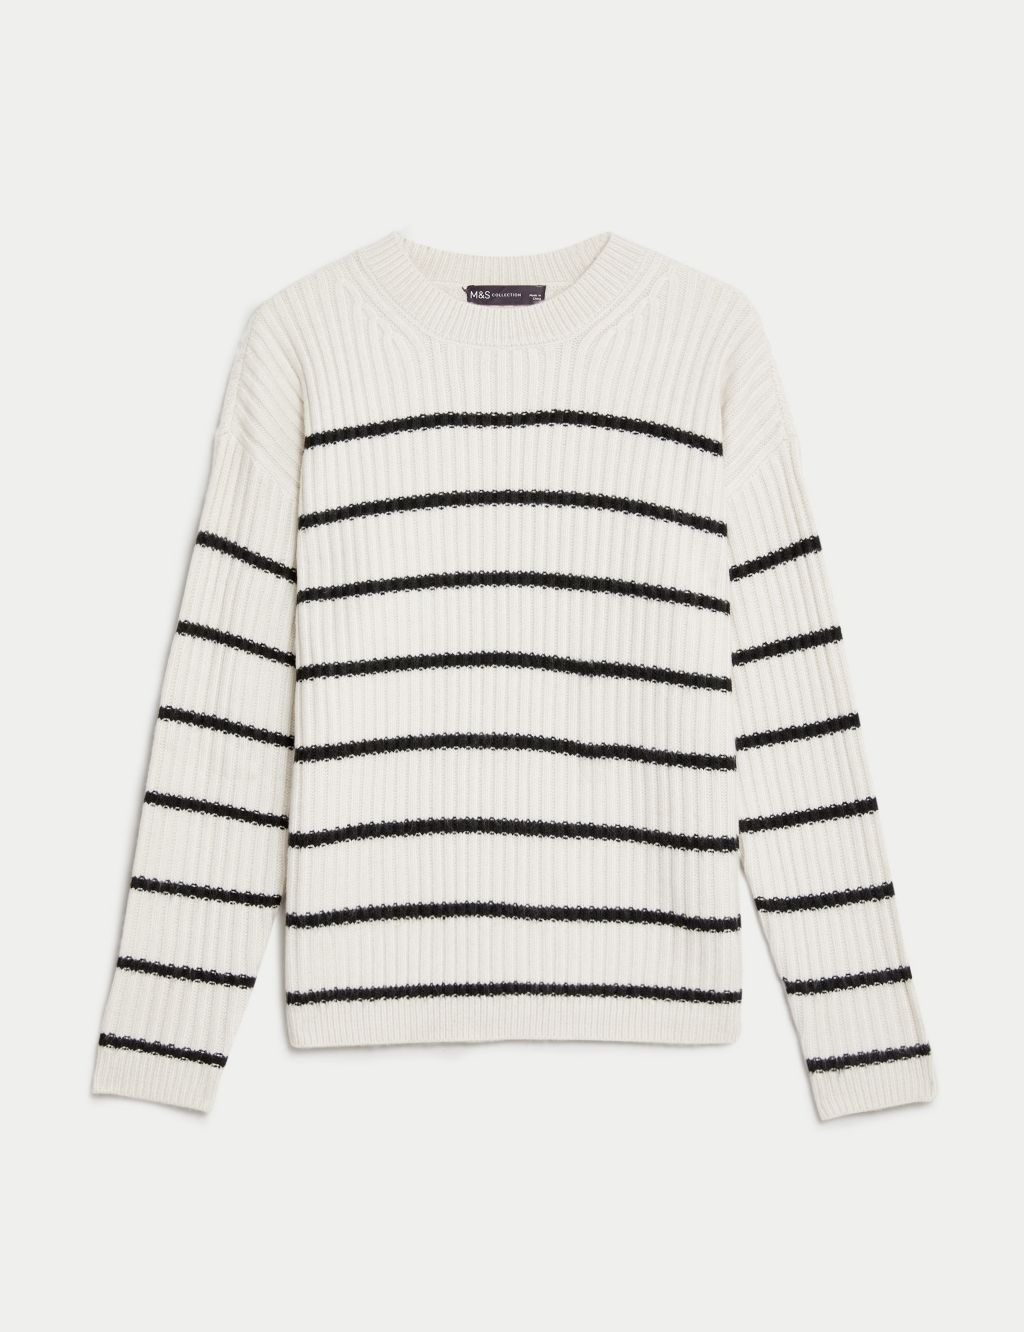 Ribbed Striped Knitted Jumper image 2